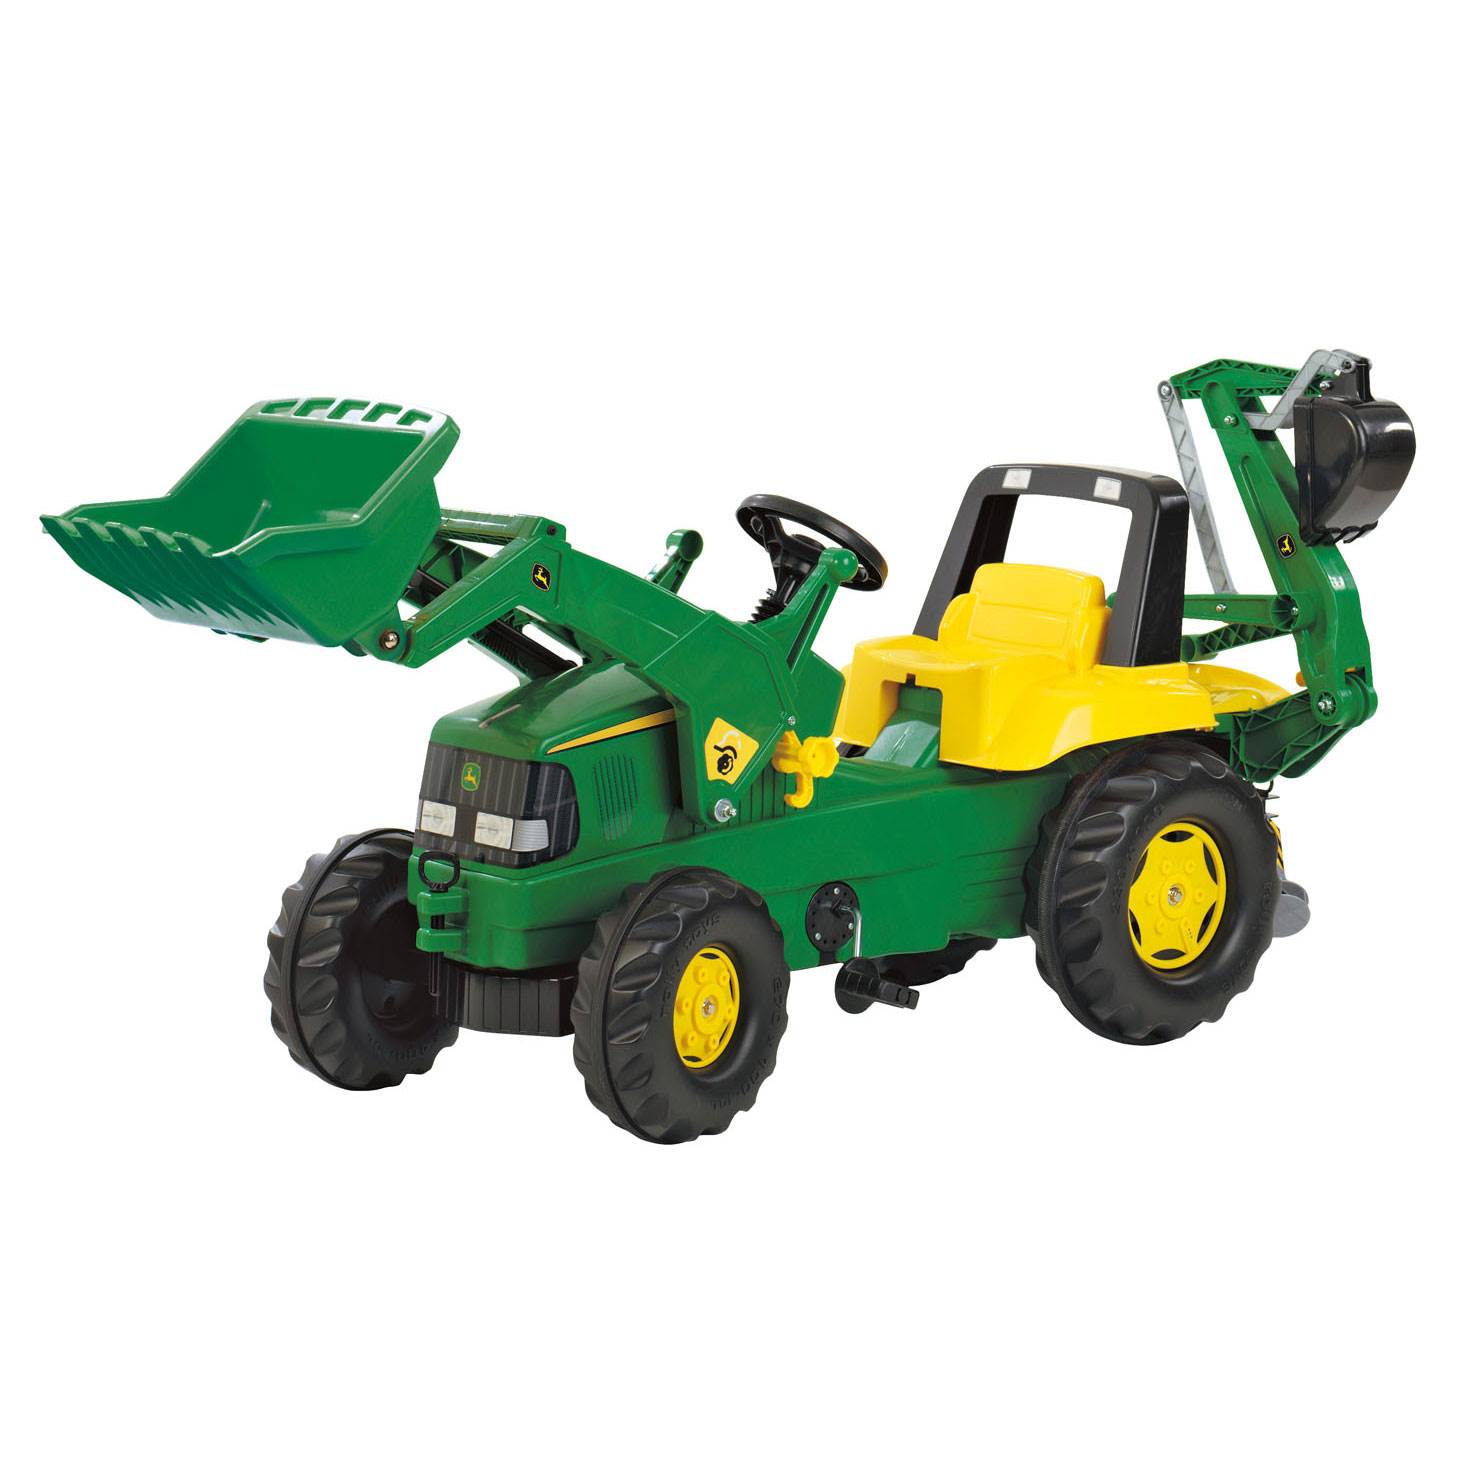 Rolly Toys John Deere Ride On Pedal Powered Tractor Loader with Working Backhoe - image 2 of 2